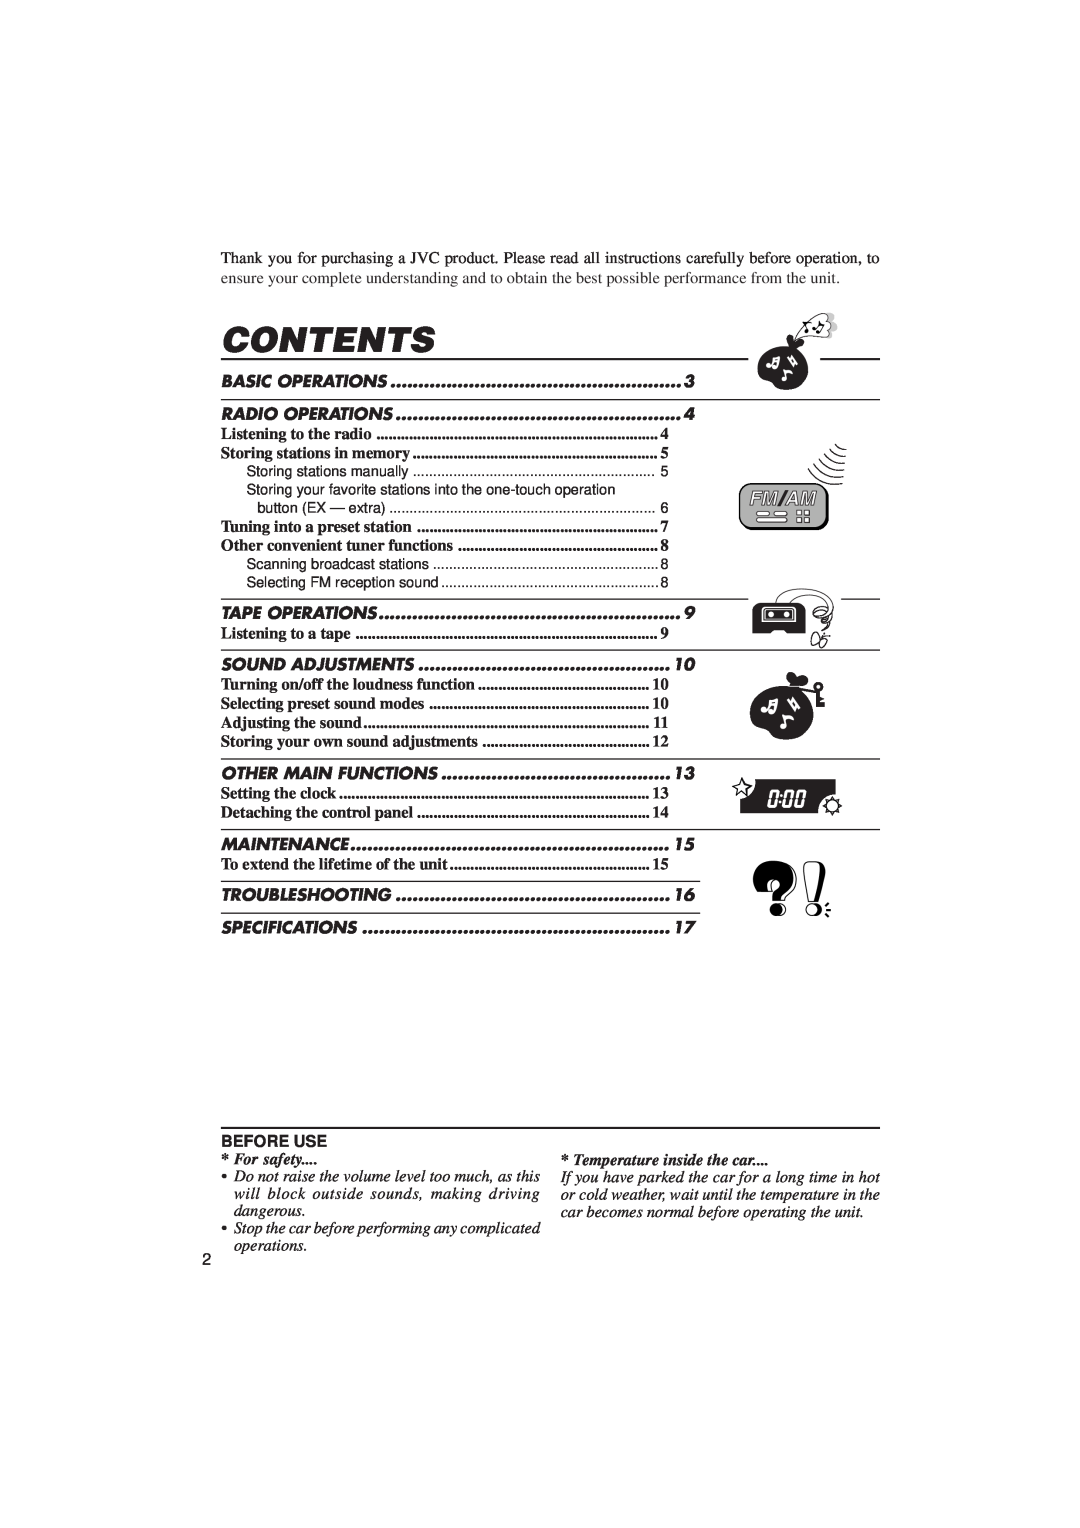 JVC KS F100 manual Contents, Before Use, For safety, Temperature inside the car 